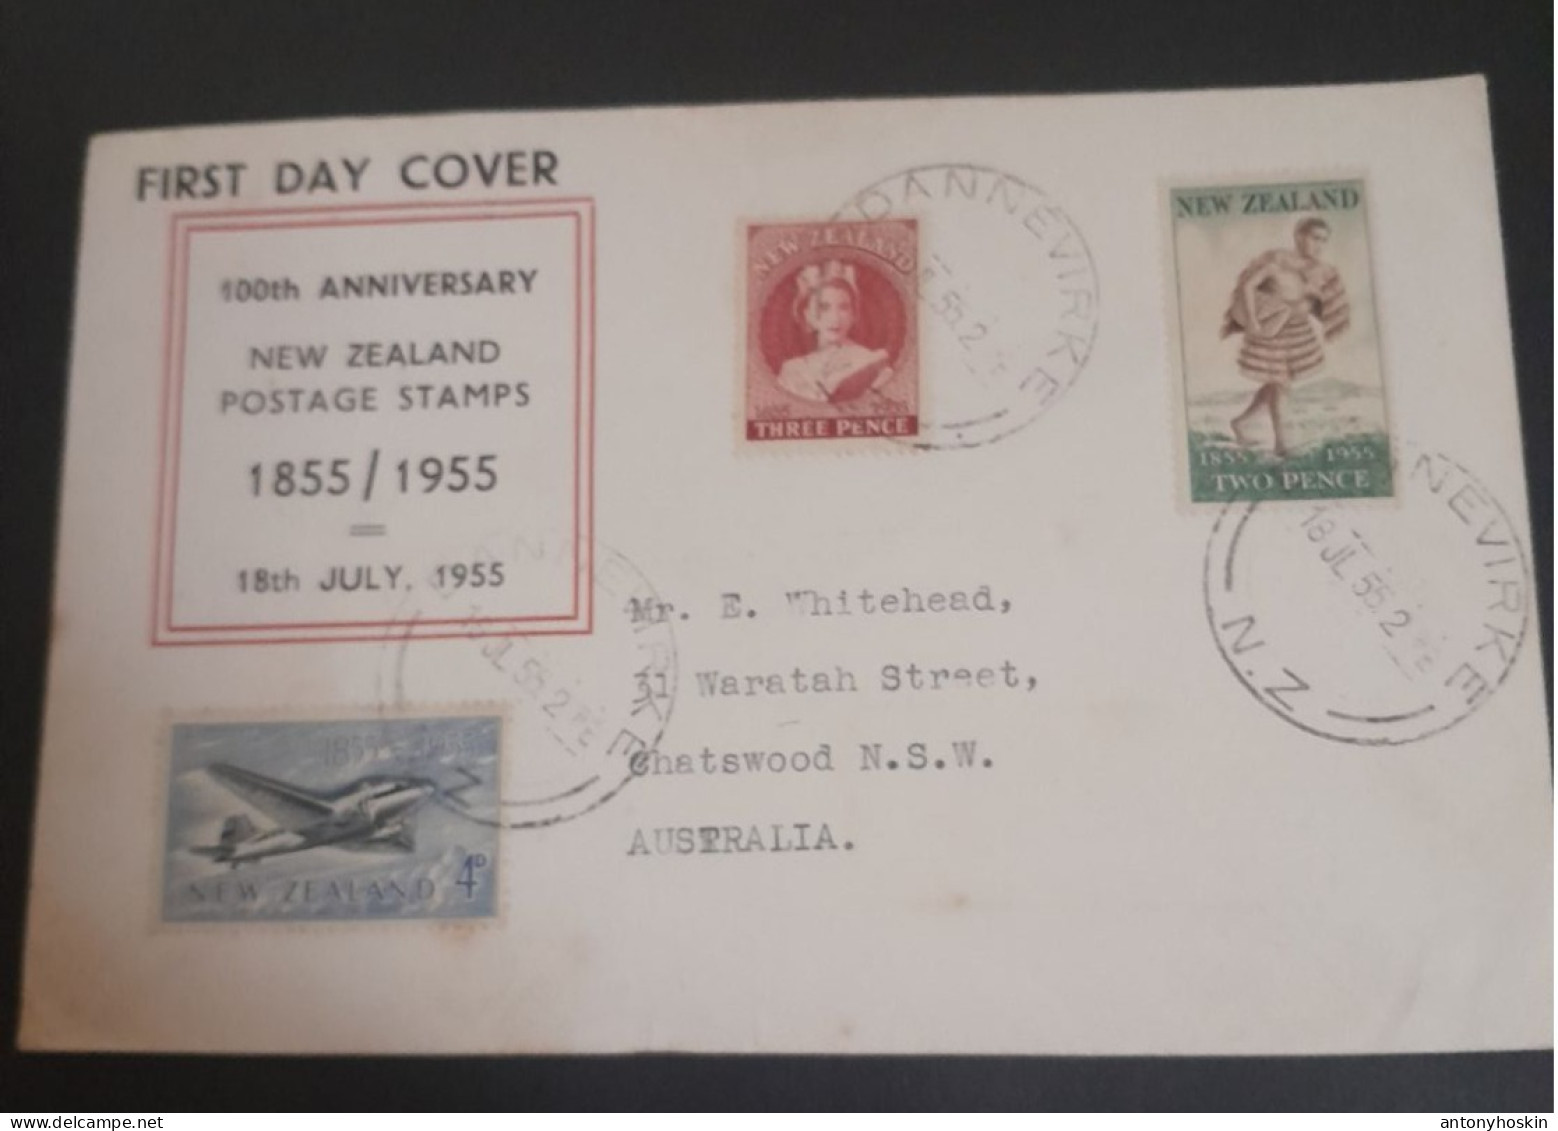 1855-1955 New Zealand Postage Stamps 100 Th Anniversary First Day Cover. - Covers & Documents